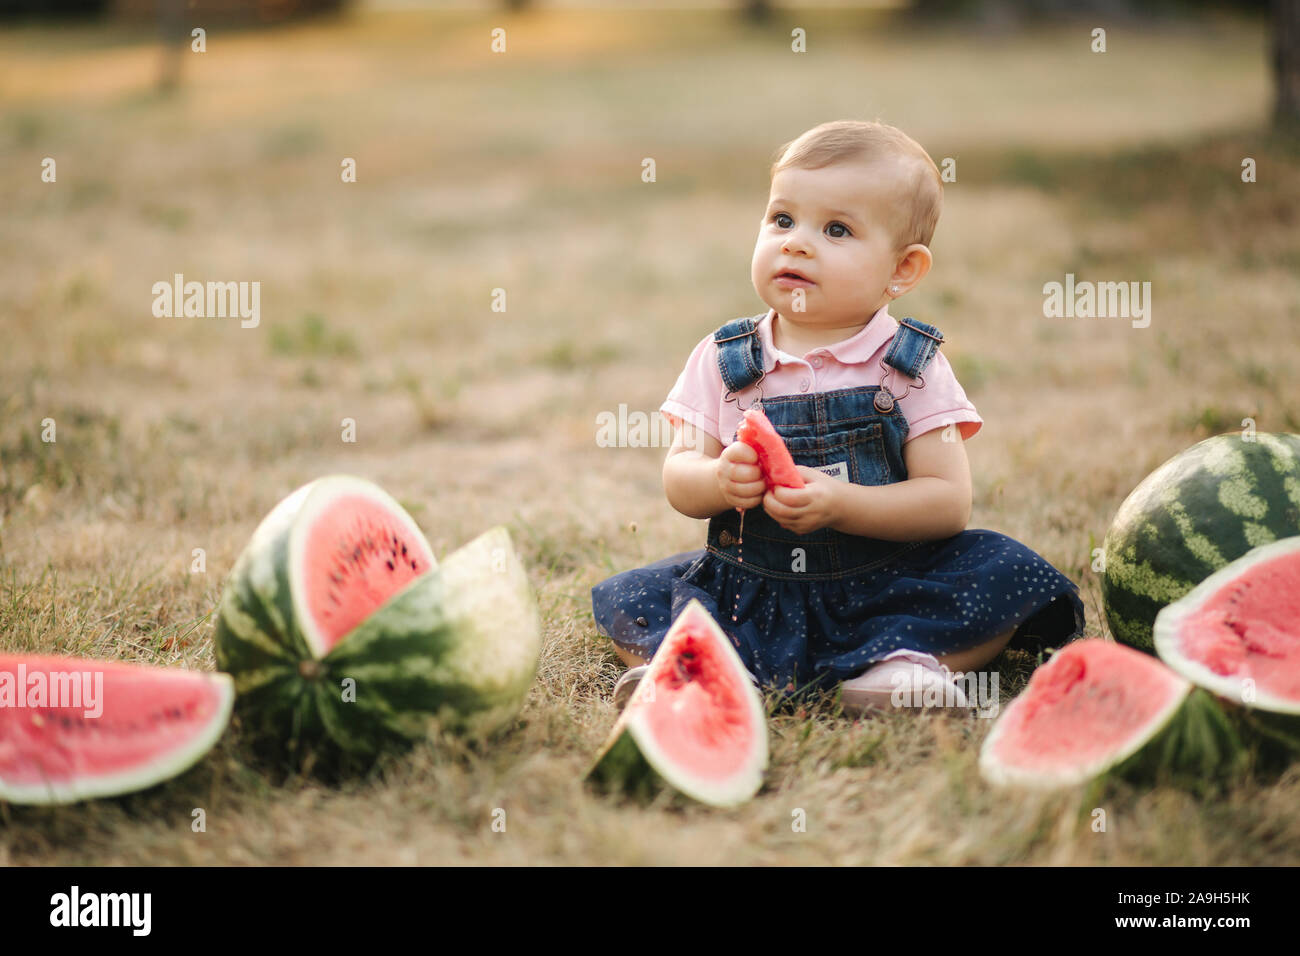 Cute Little Baby Girl Laughing With Watermelons Girl Dressed In Denim Dress Summer Portrait Of Child And Watermelon Outdoors Adorable Baby Eat Frui Stock Photo Alamy